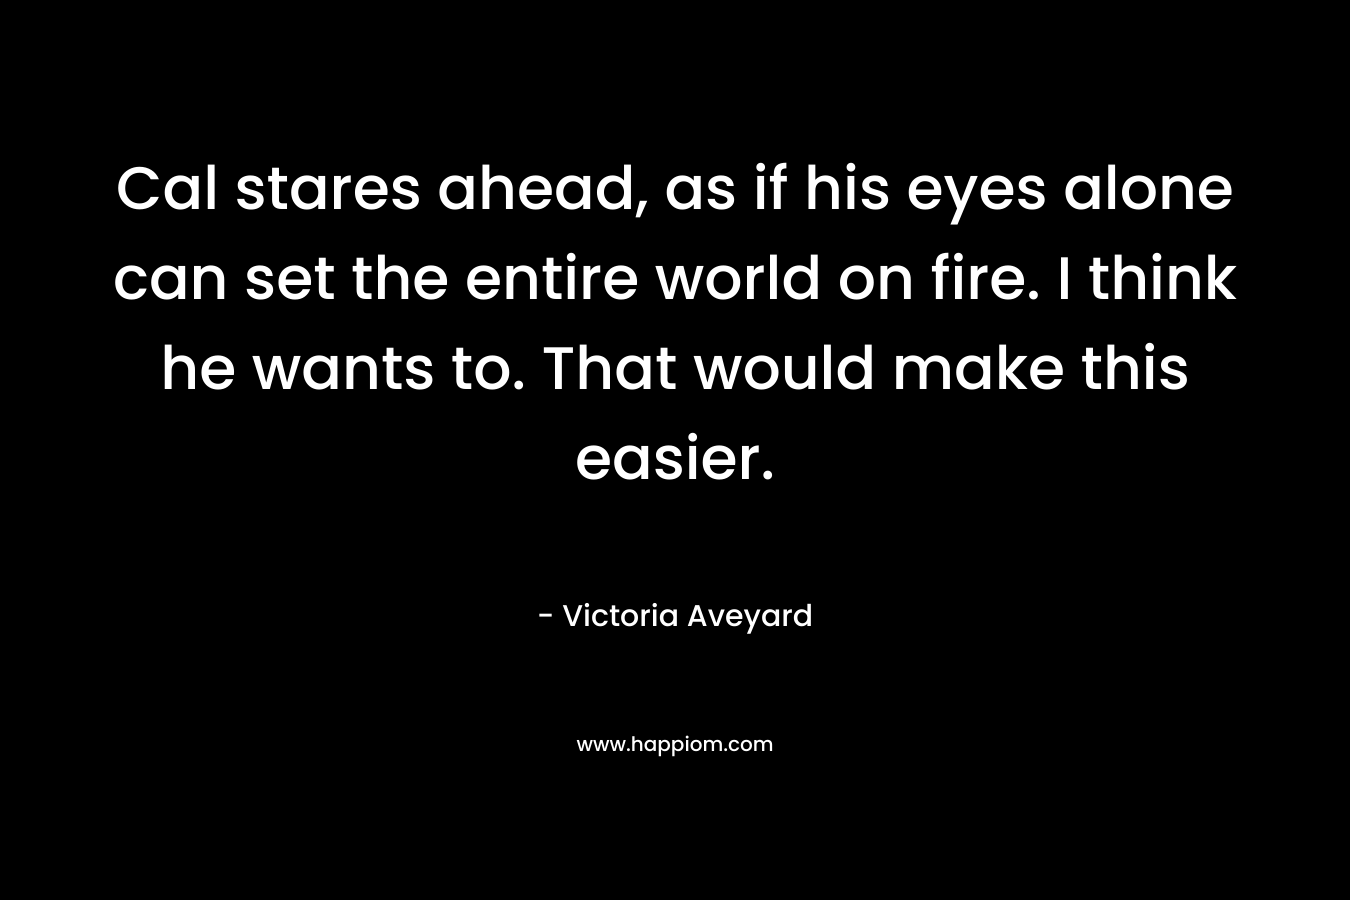 Cal stares ahead, as if his eyes alone can set the entire world on fire. I think he wants to. That would make this easier. – Victoria Aveyard